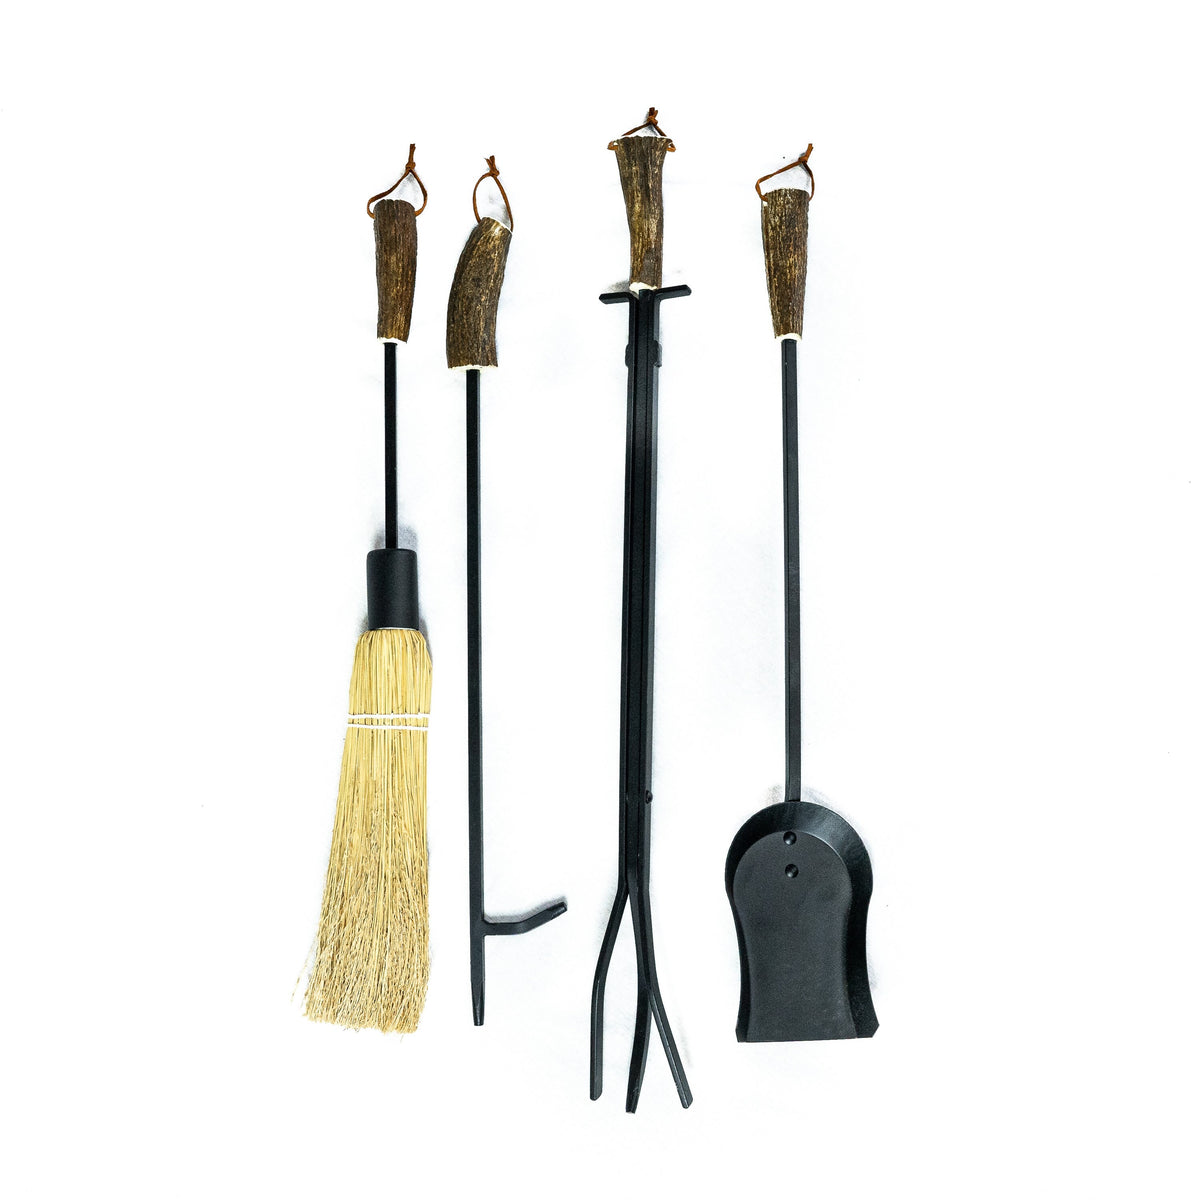 Moose Antler Fireplace Set - Includes Four Fireplace Tools: Poker, Brush, Shovel, Tongs and Stand - W/ Real Antler Handles